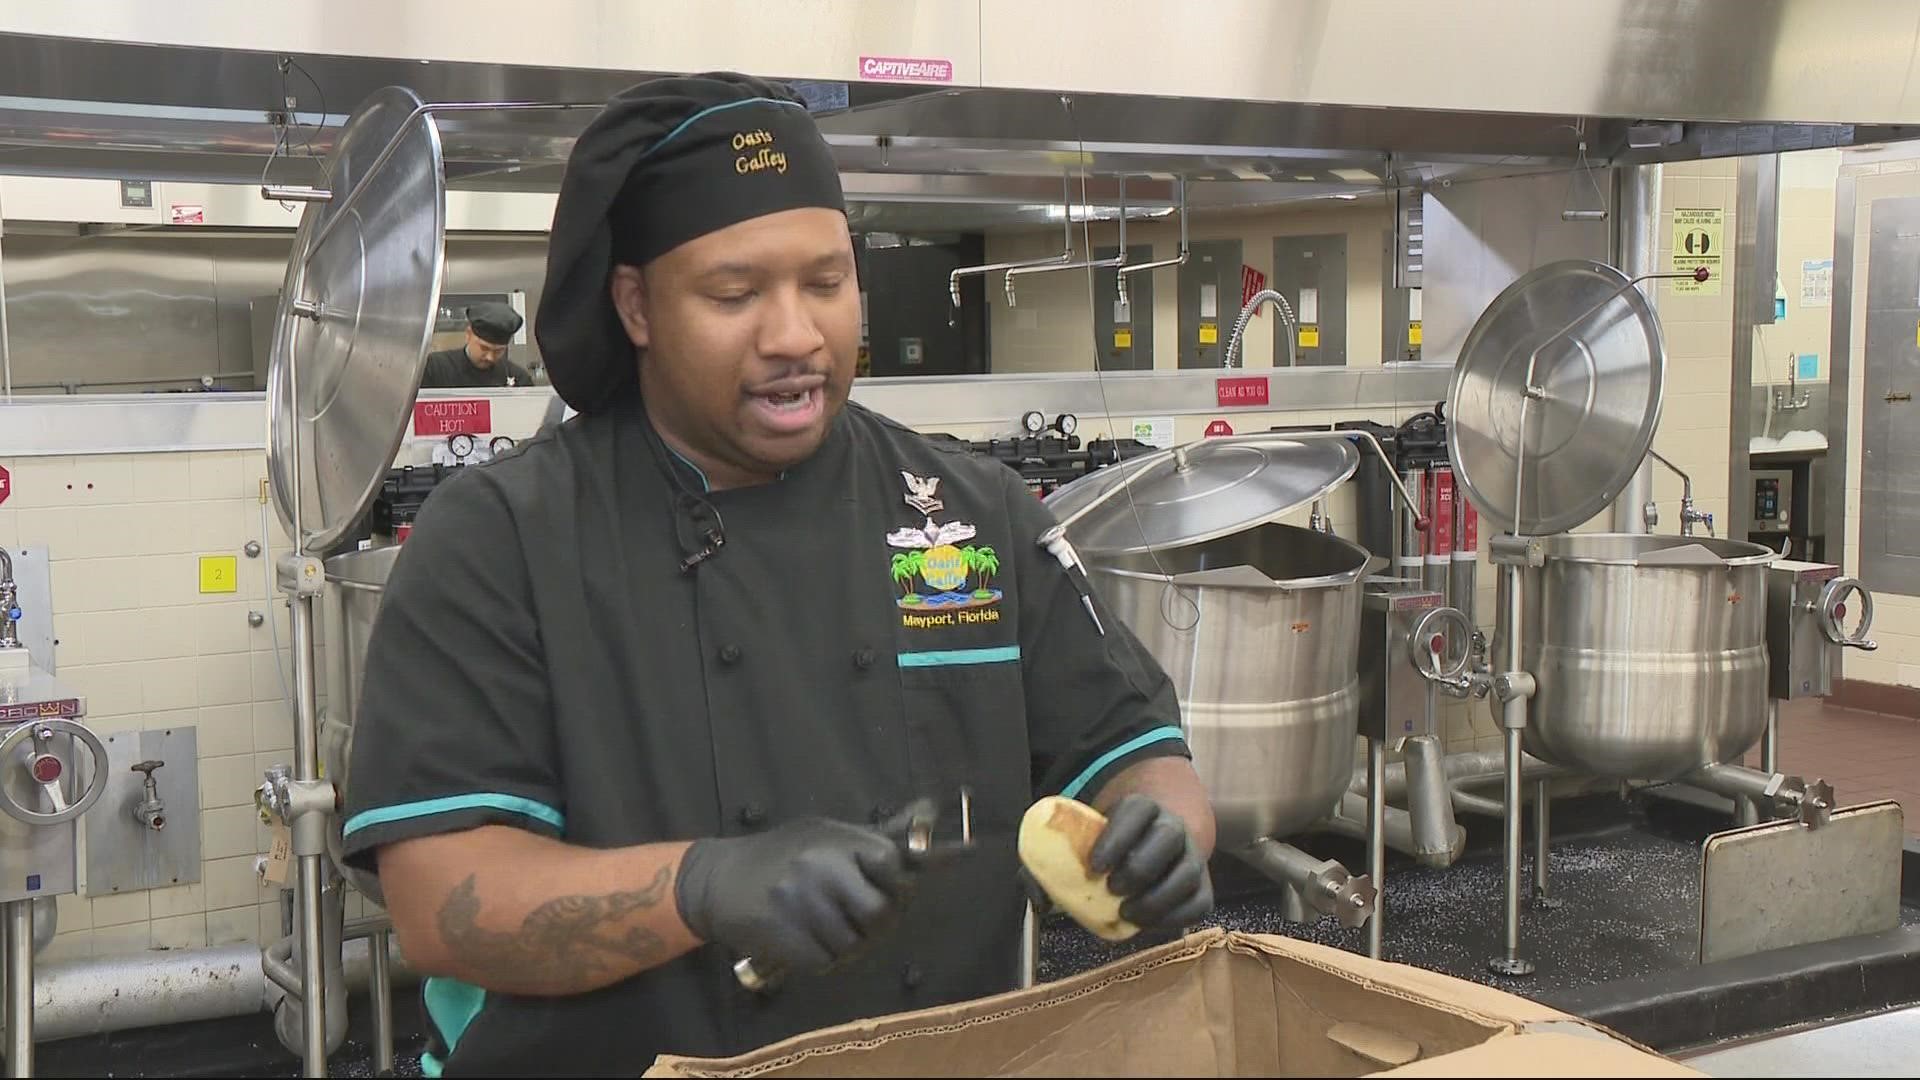 The culinary workers at Naval Station Mayport are hard at work this holiday season.